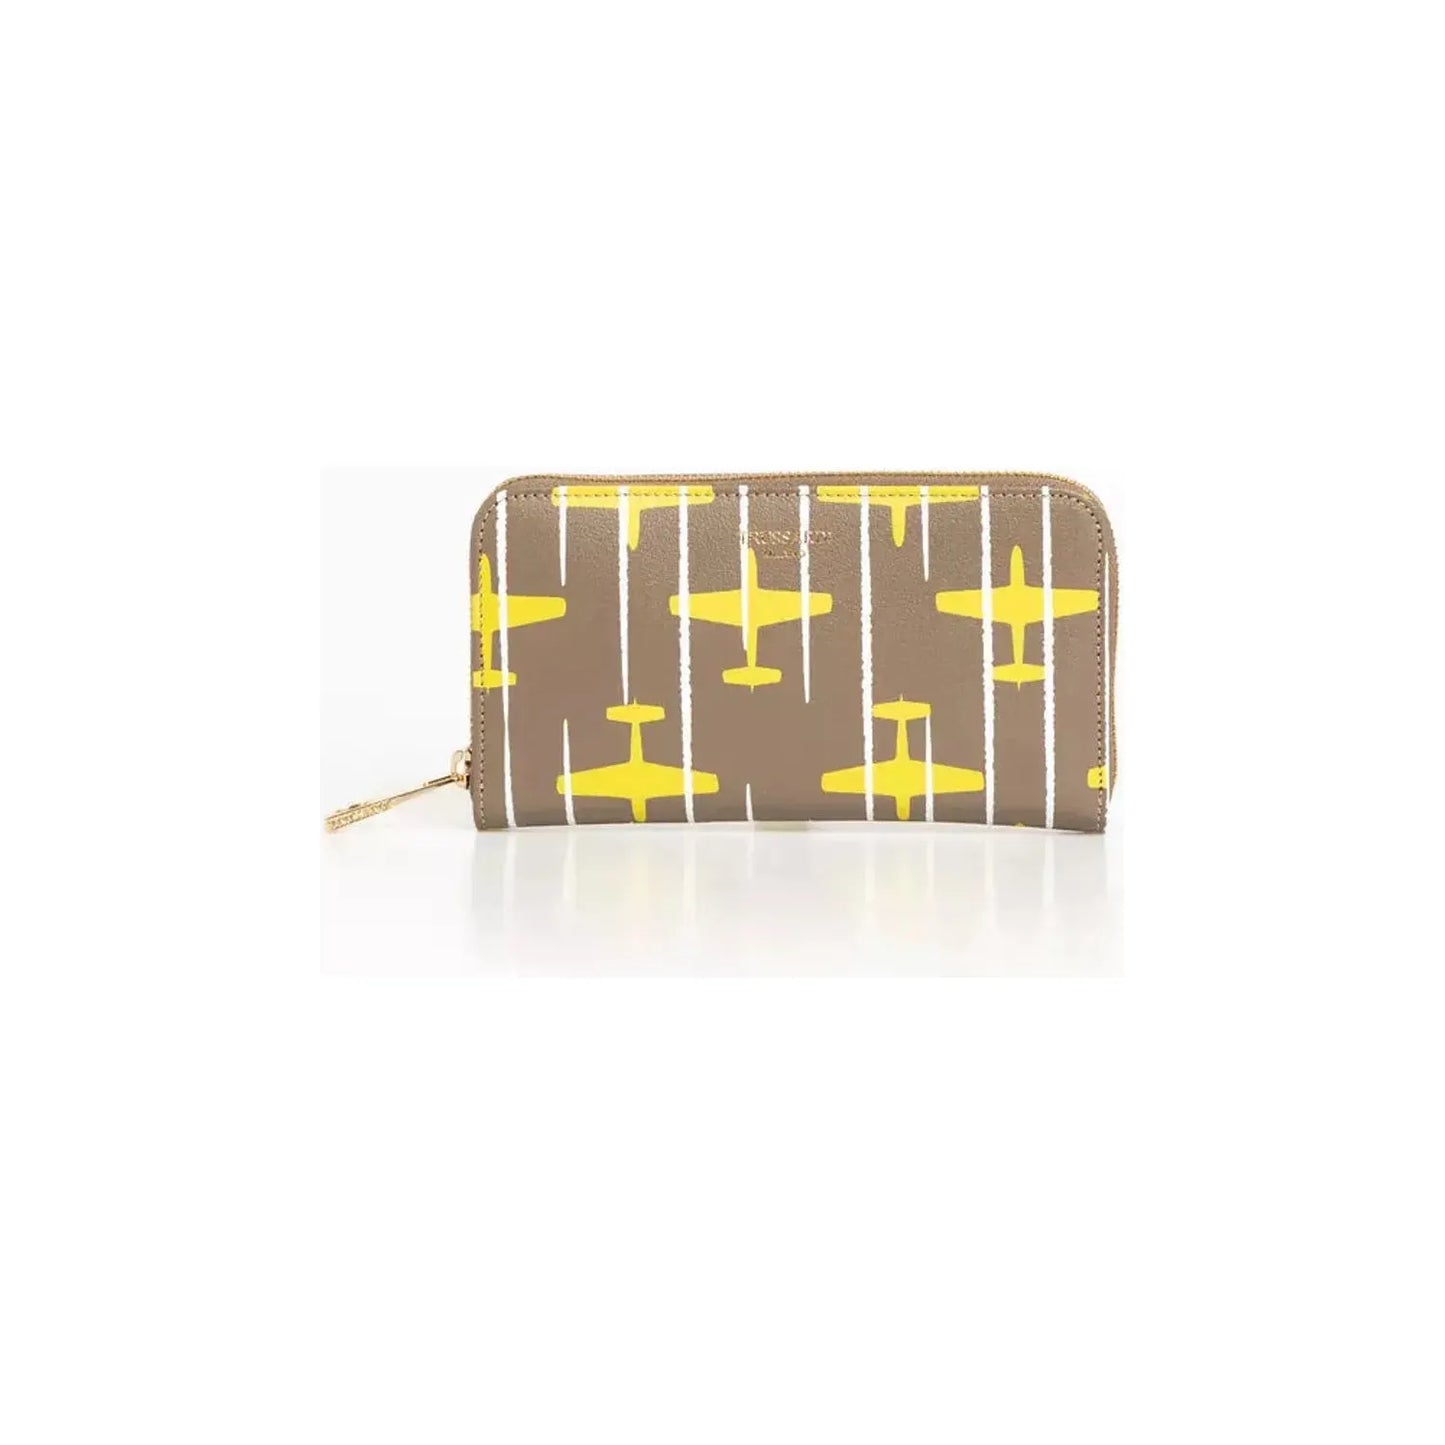 Trussardi Elegant Striped Leather Zip Wallet Wallet y-yellow-leather-wallet stock_product_image_21531_2066337713-28-5b10c435-f27.webp